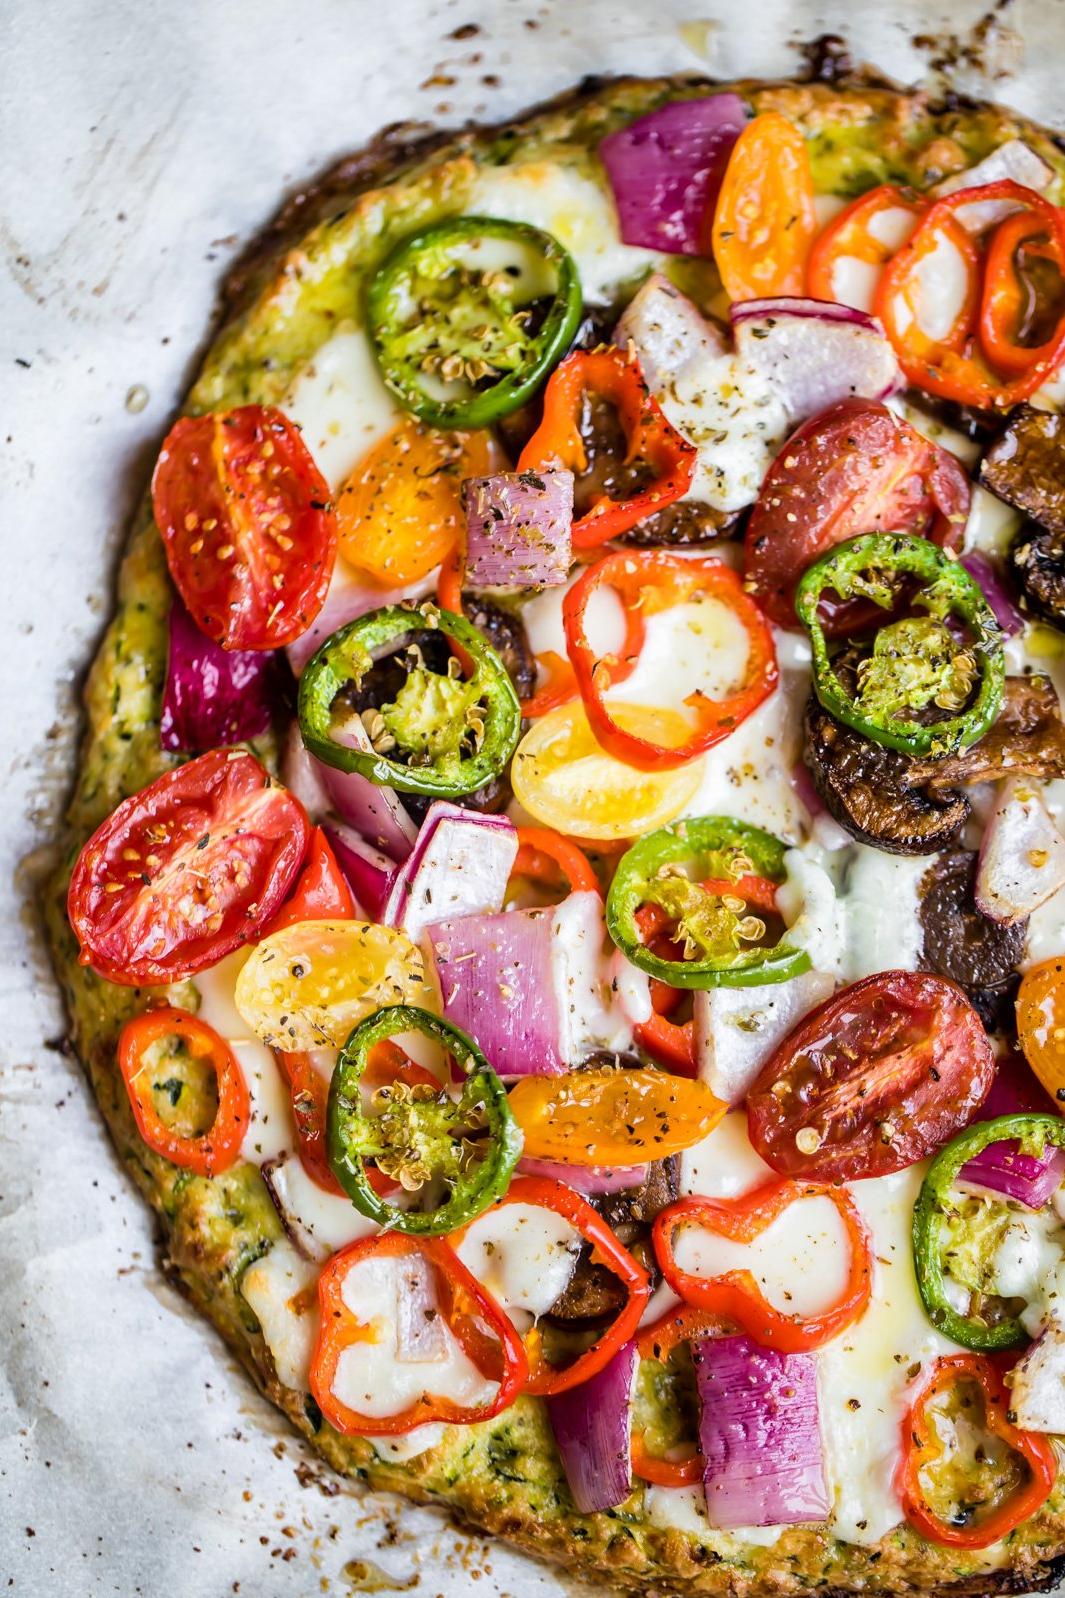  Get ready to indulge in a healthy and tasty pizza that’s full of goodness.